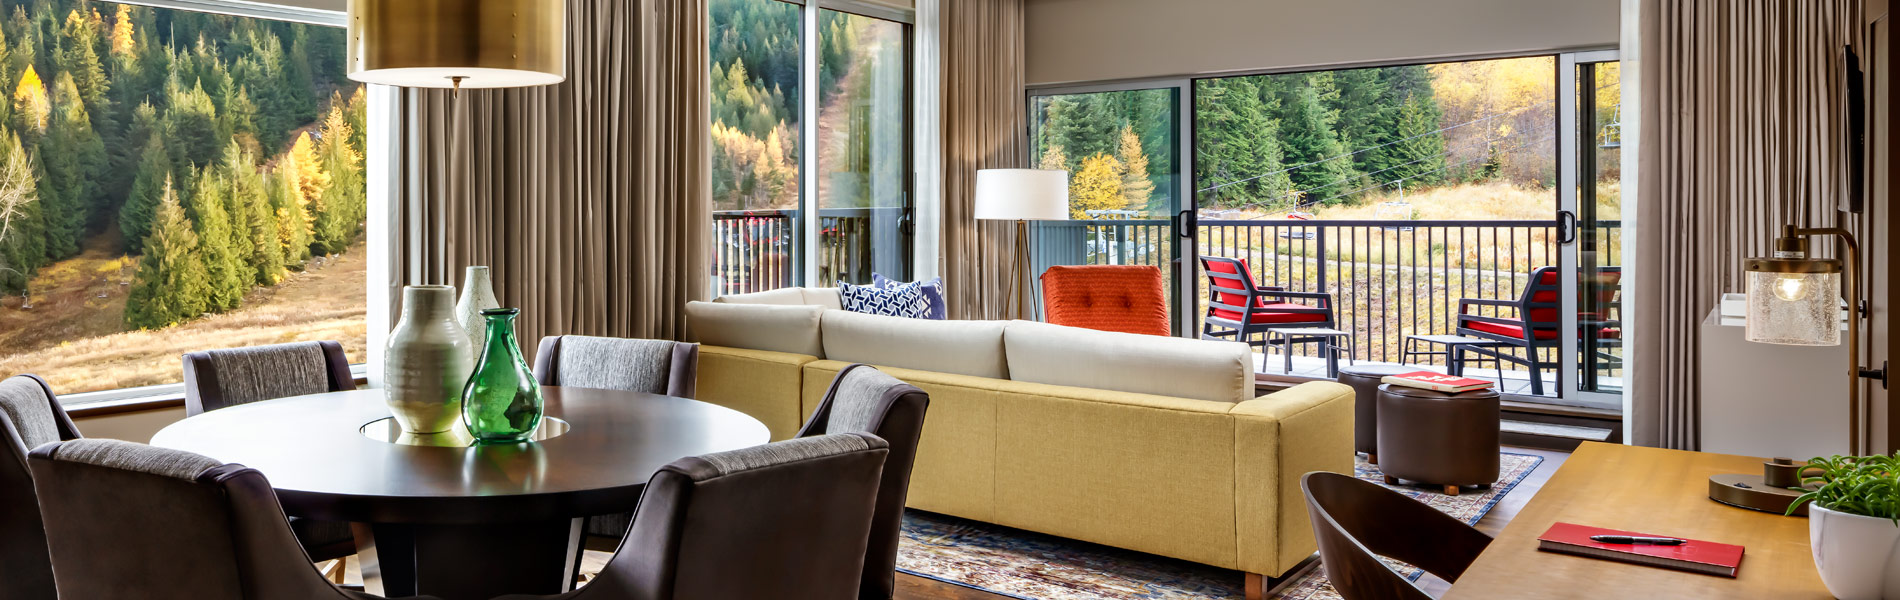 The newest boutique hotel in British Columbia debuts in the West Kootenays